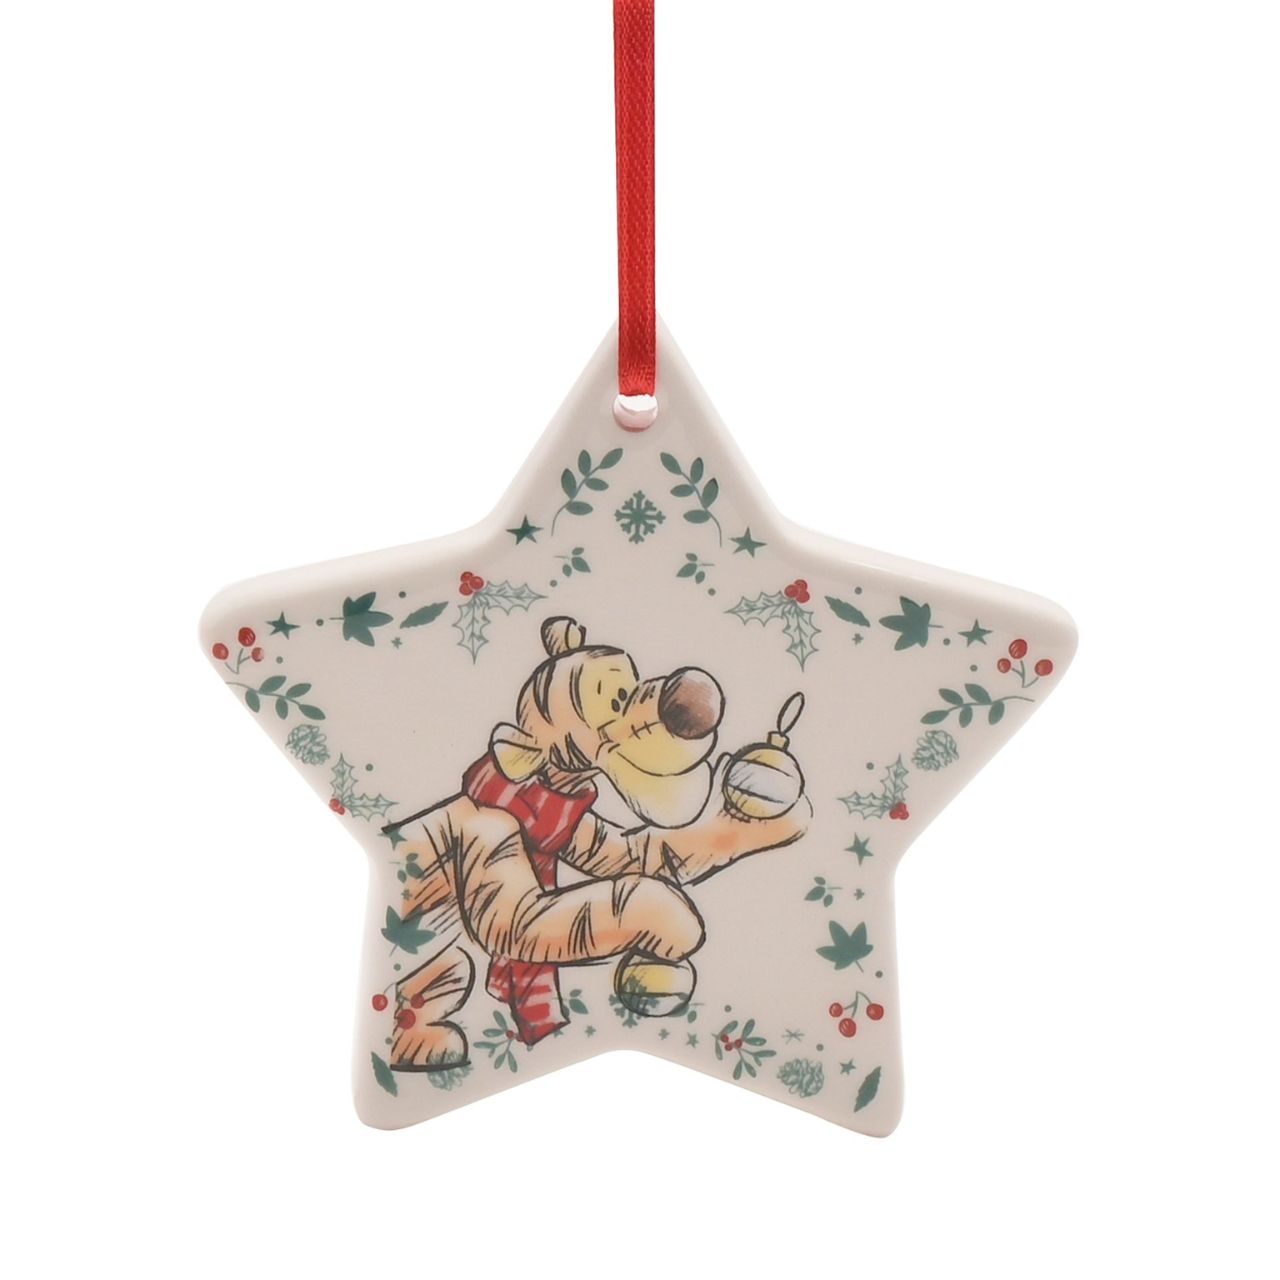 Disney Winnie the Pooh Christmas Decorations Set of 4 Ceramic  A set of 4 Winnie the Pooh ceramic decorations by DISNEY®.  These fun-filled decorations will hang proudly from the Christmas tree throughout December.